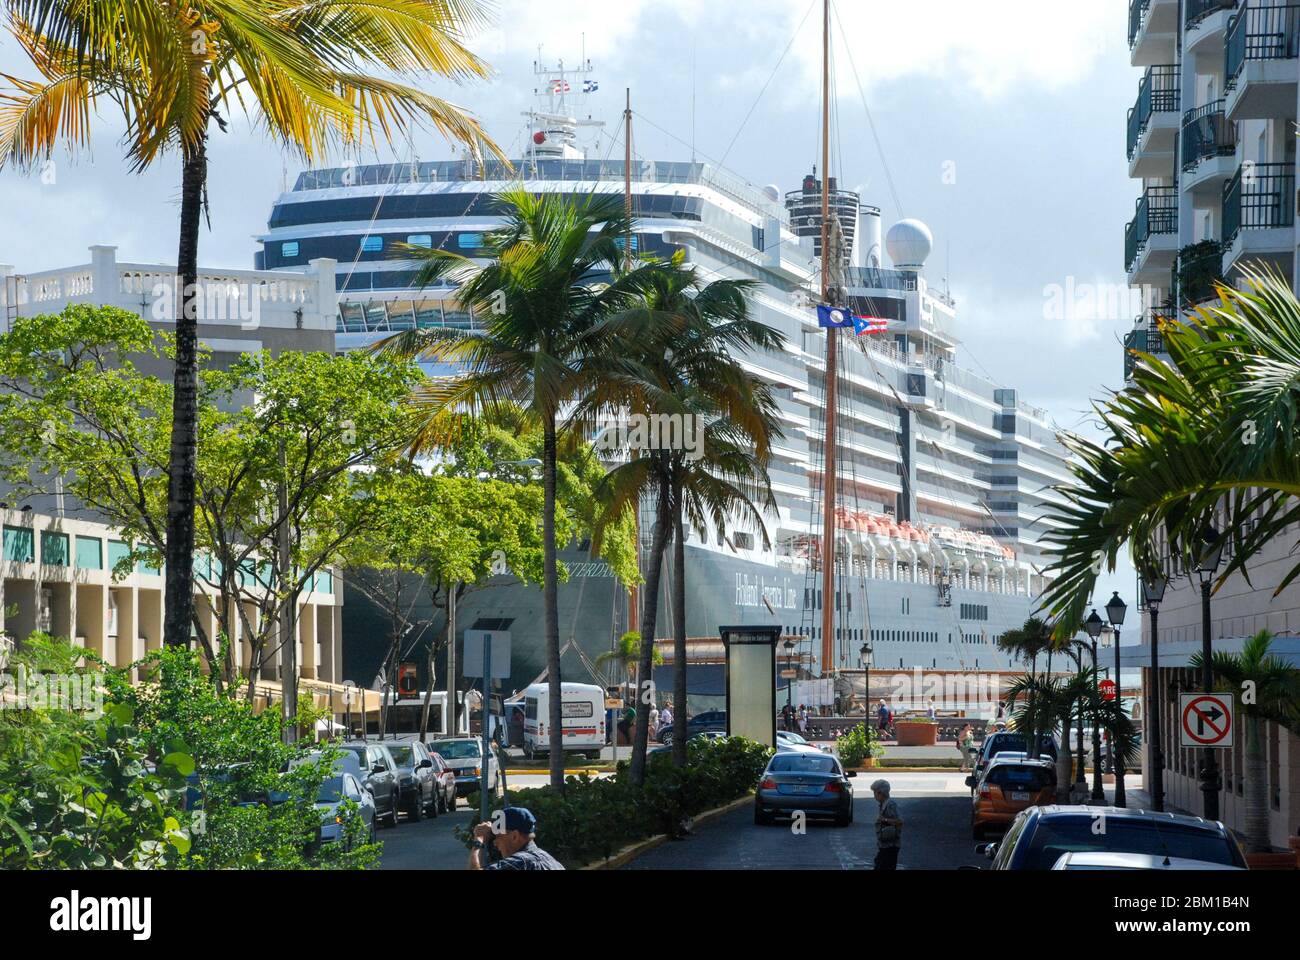 Nieuw Amsterdam cruise ship owned by the Holland America Line moored in San Juan harbour on the Caribbean island of Puerto Rico Stock Photo